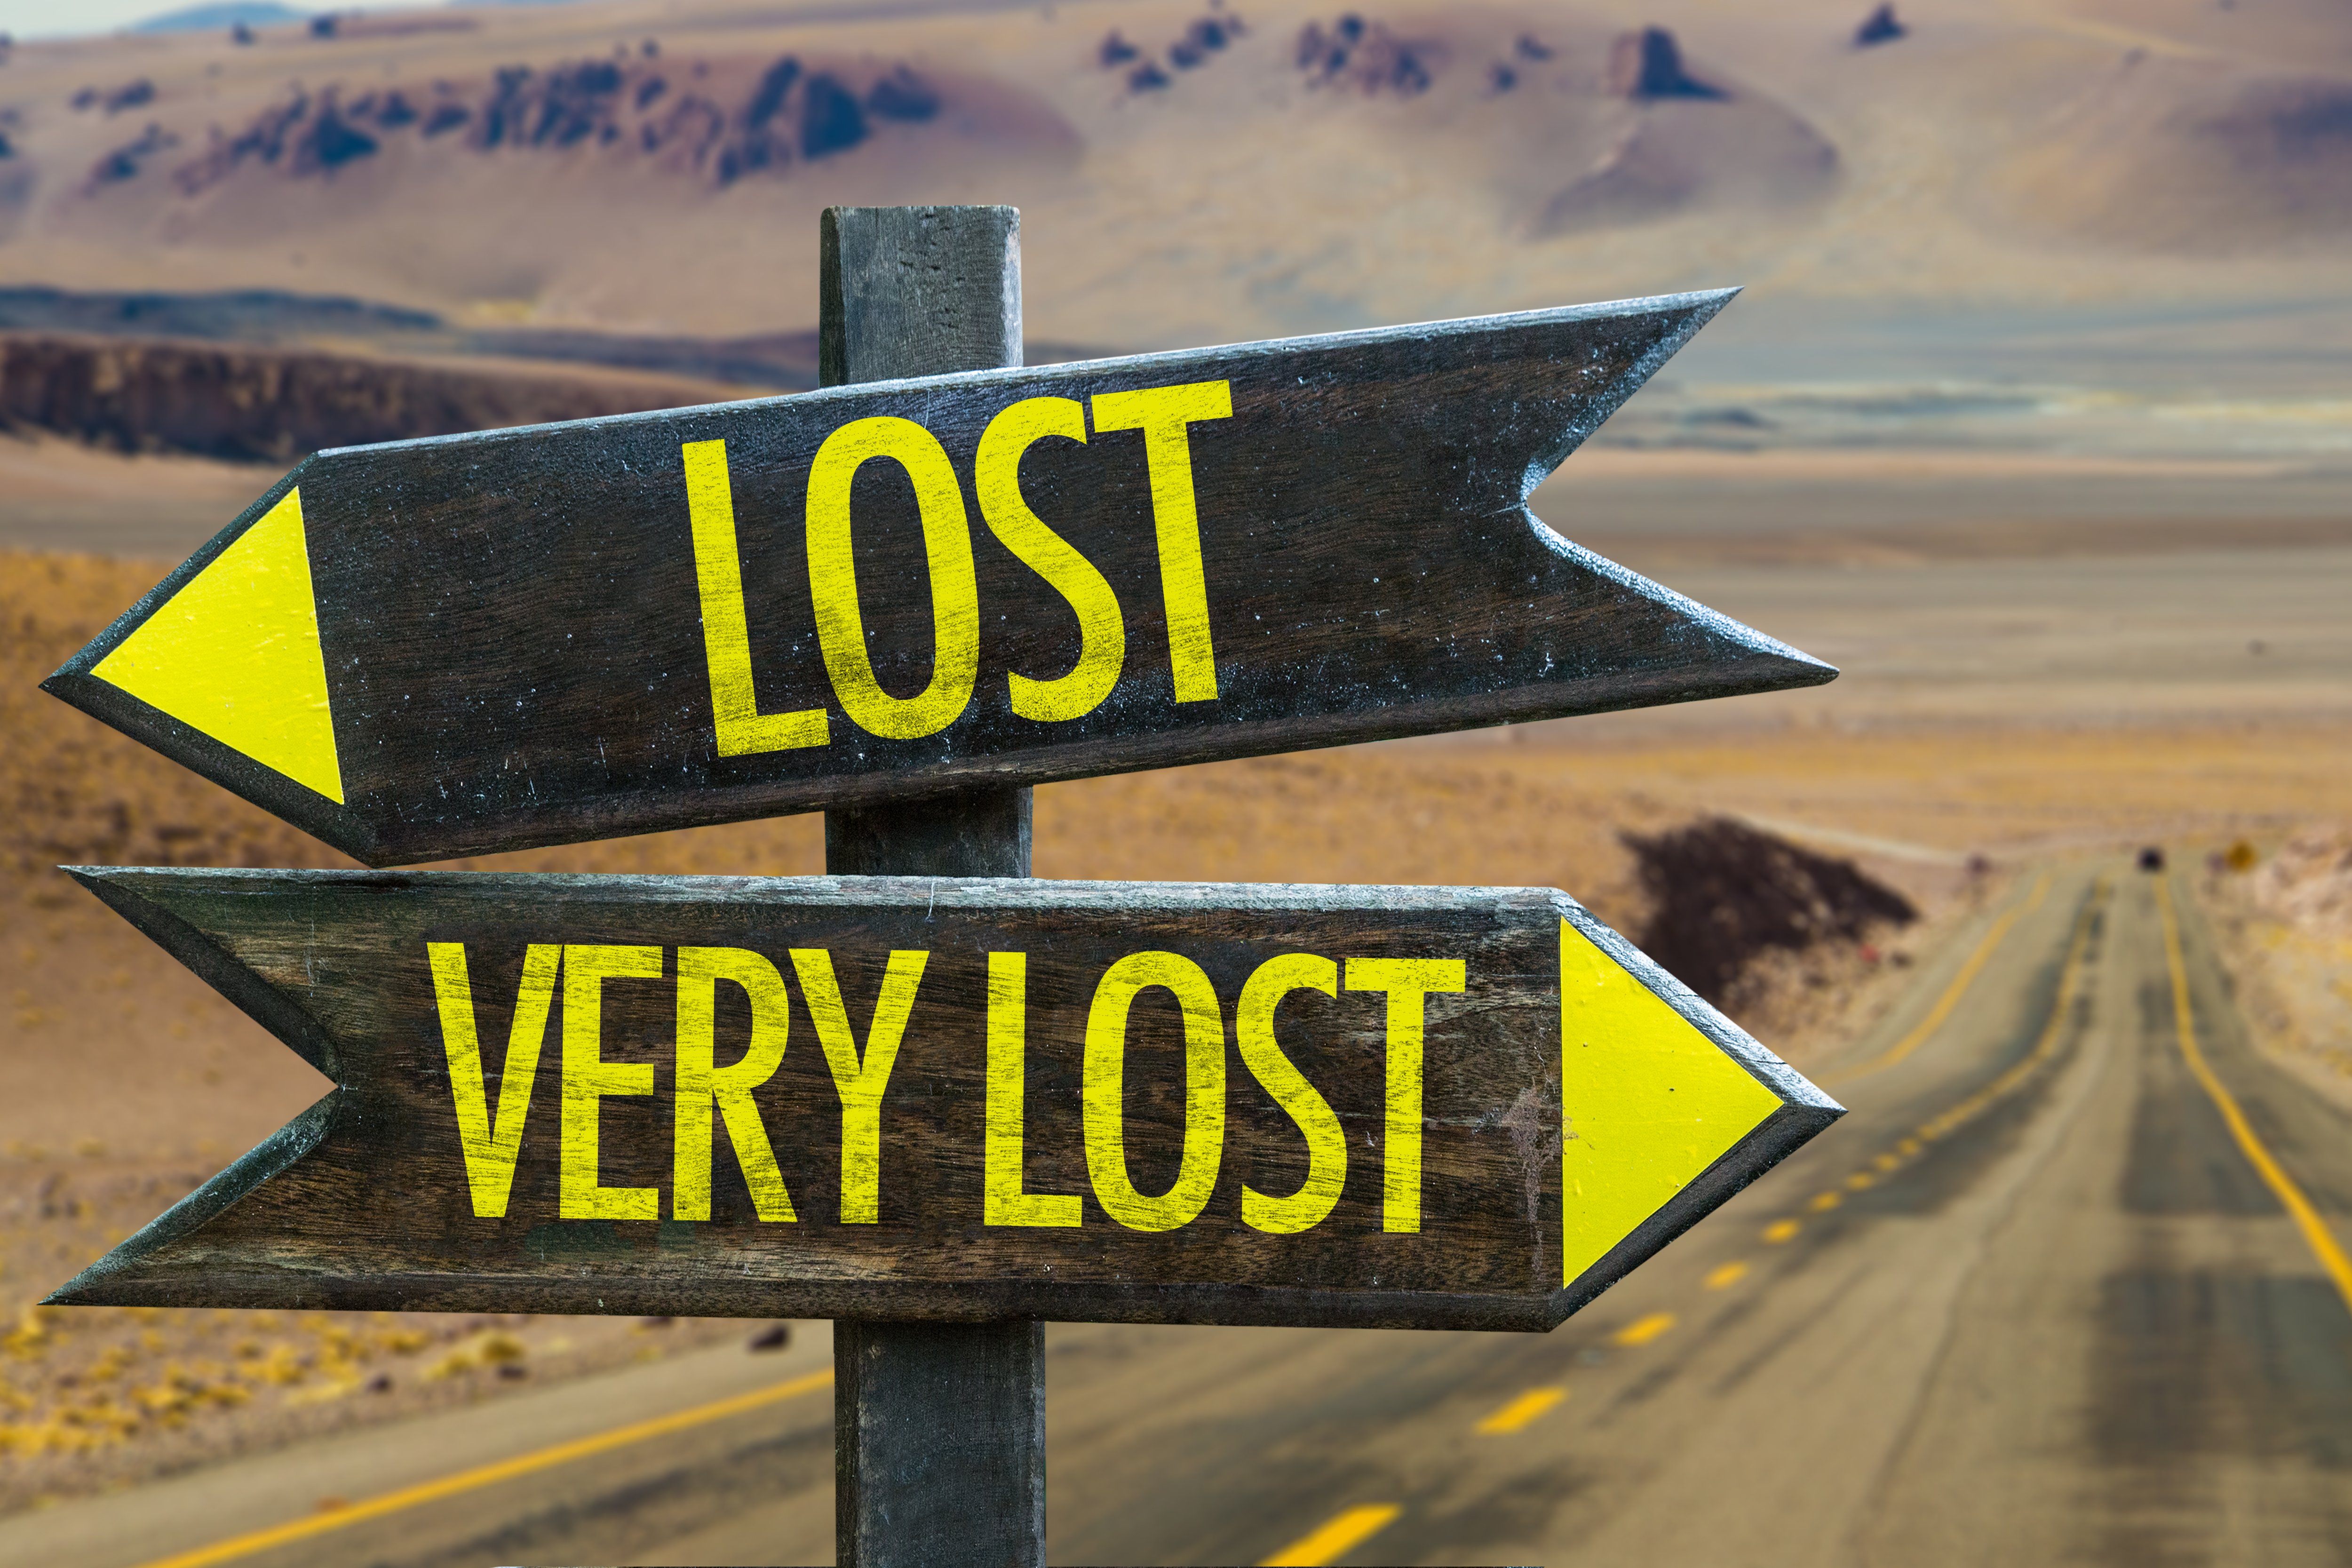 Two signs one reading lost and the other reading very lost pointing in opposite directions on a desert road